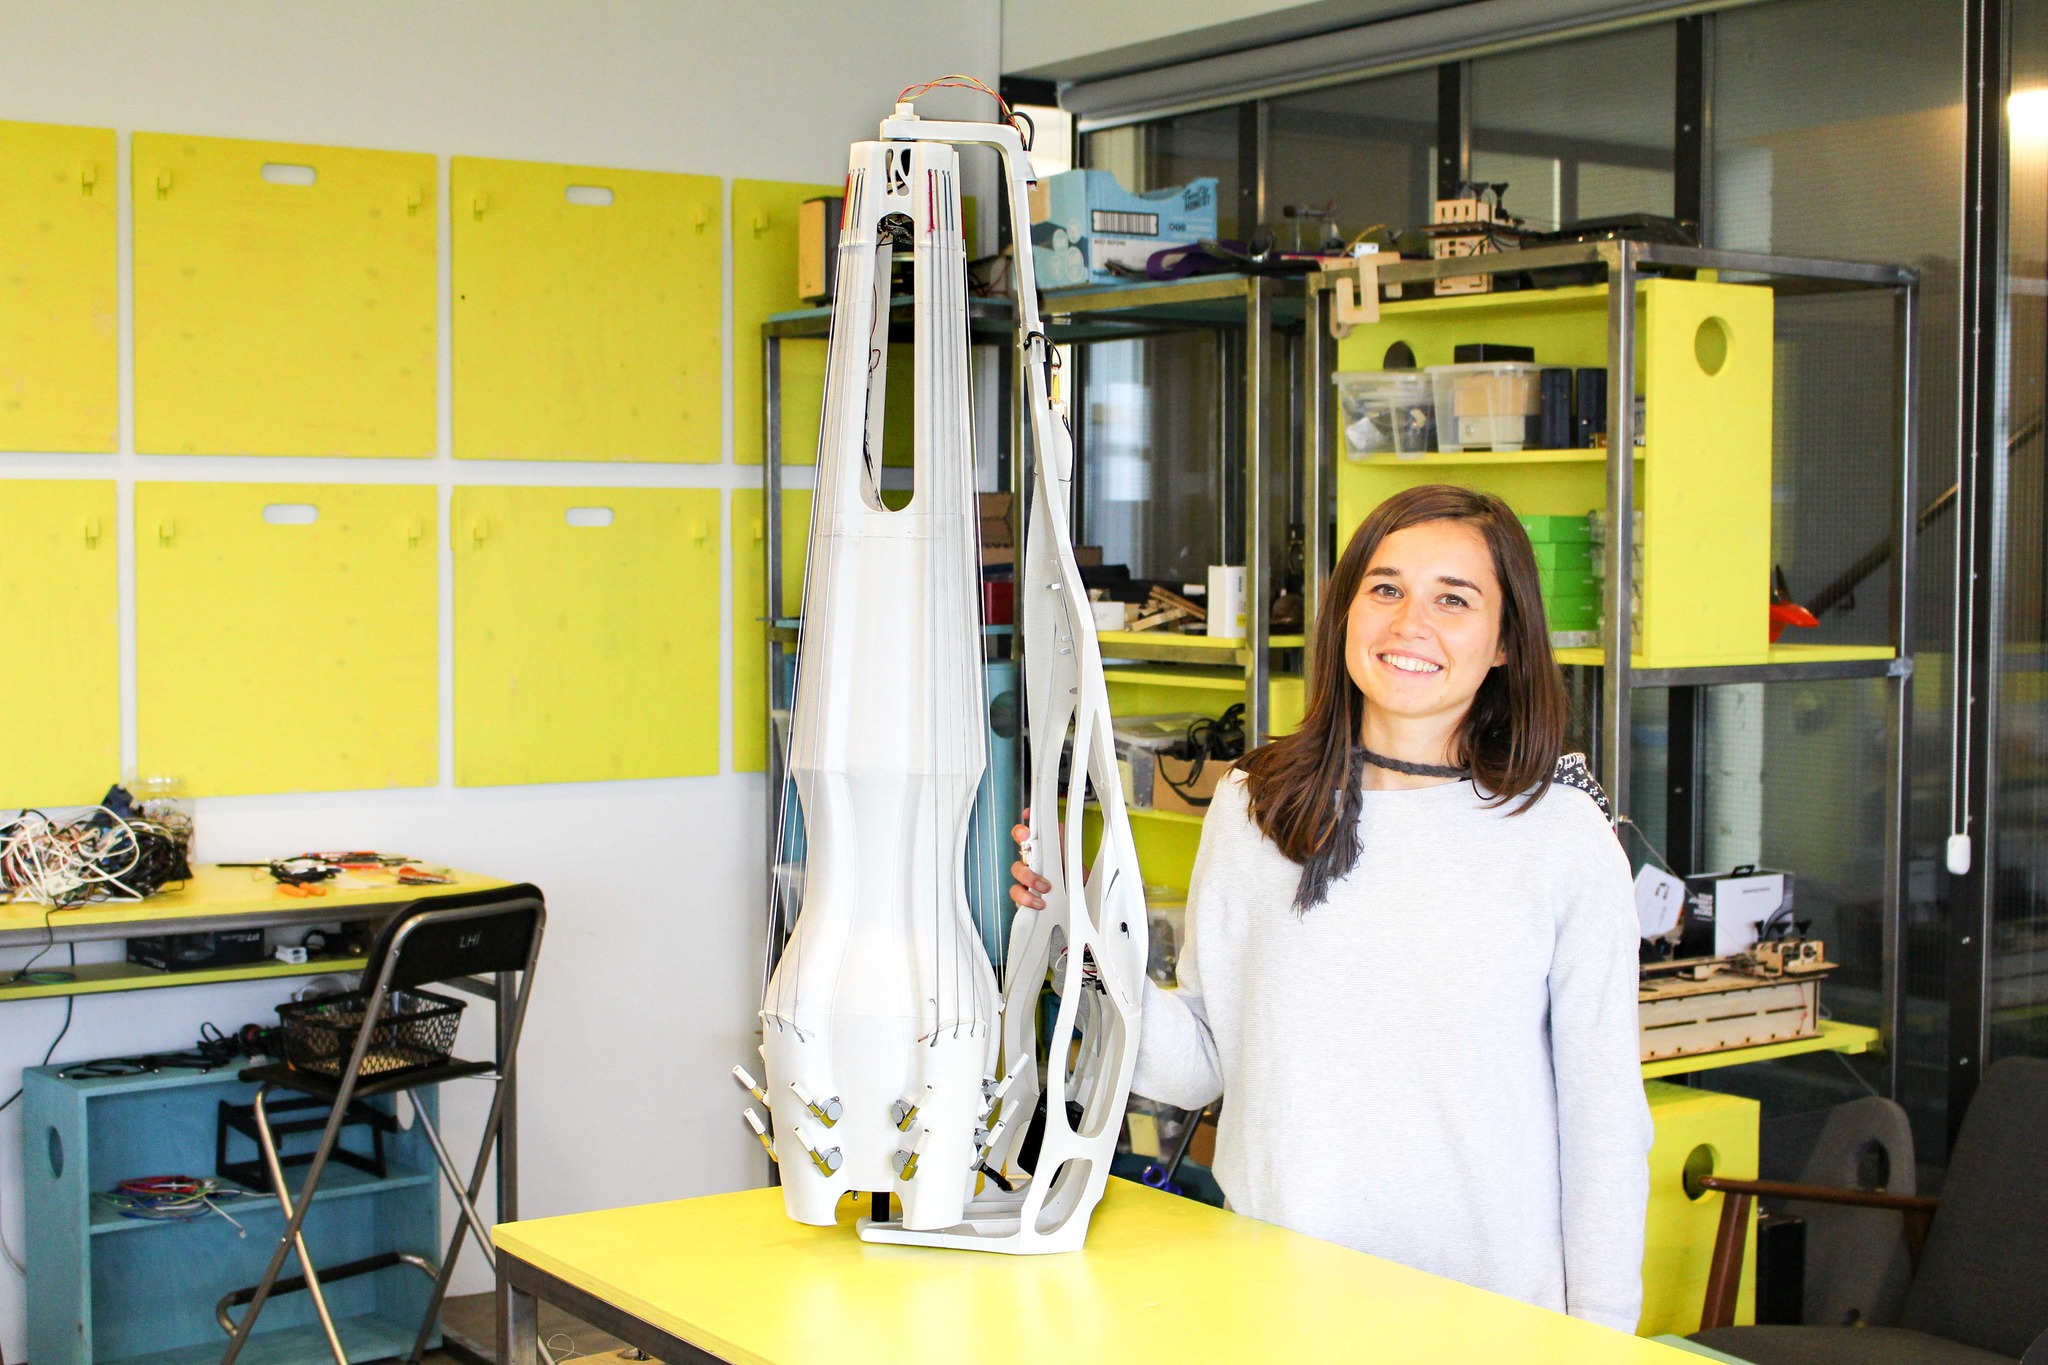 A young woman holding a large white upright instrument in a yellow research lab.